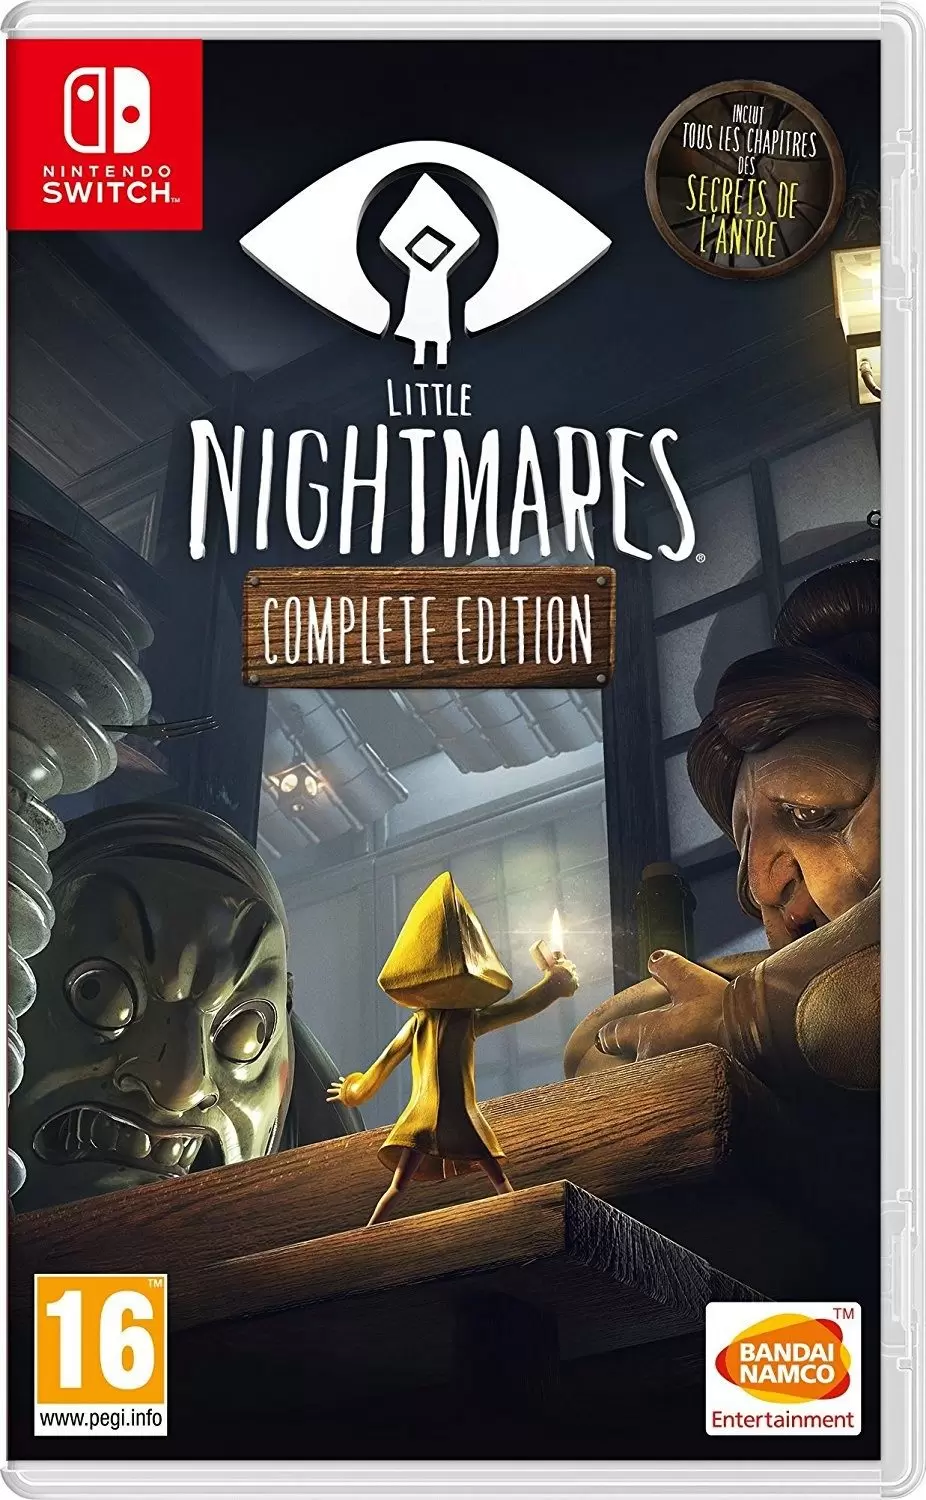 Nintendo Switch Games - Little Nightmares - Complete Edition